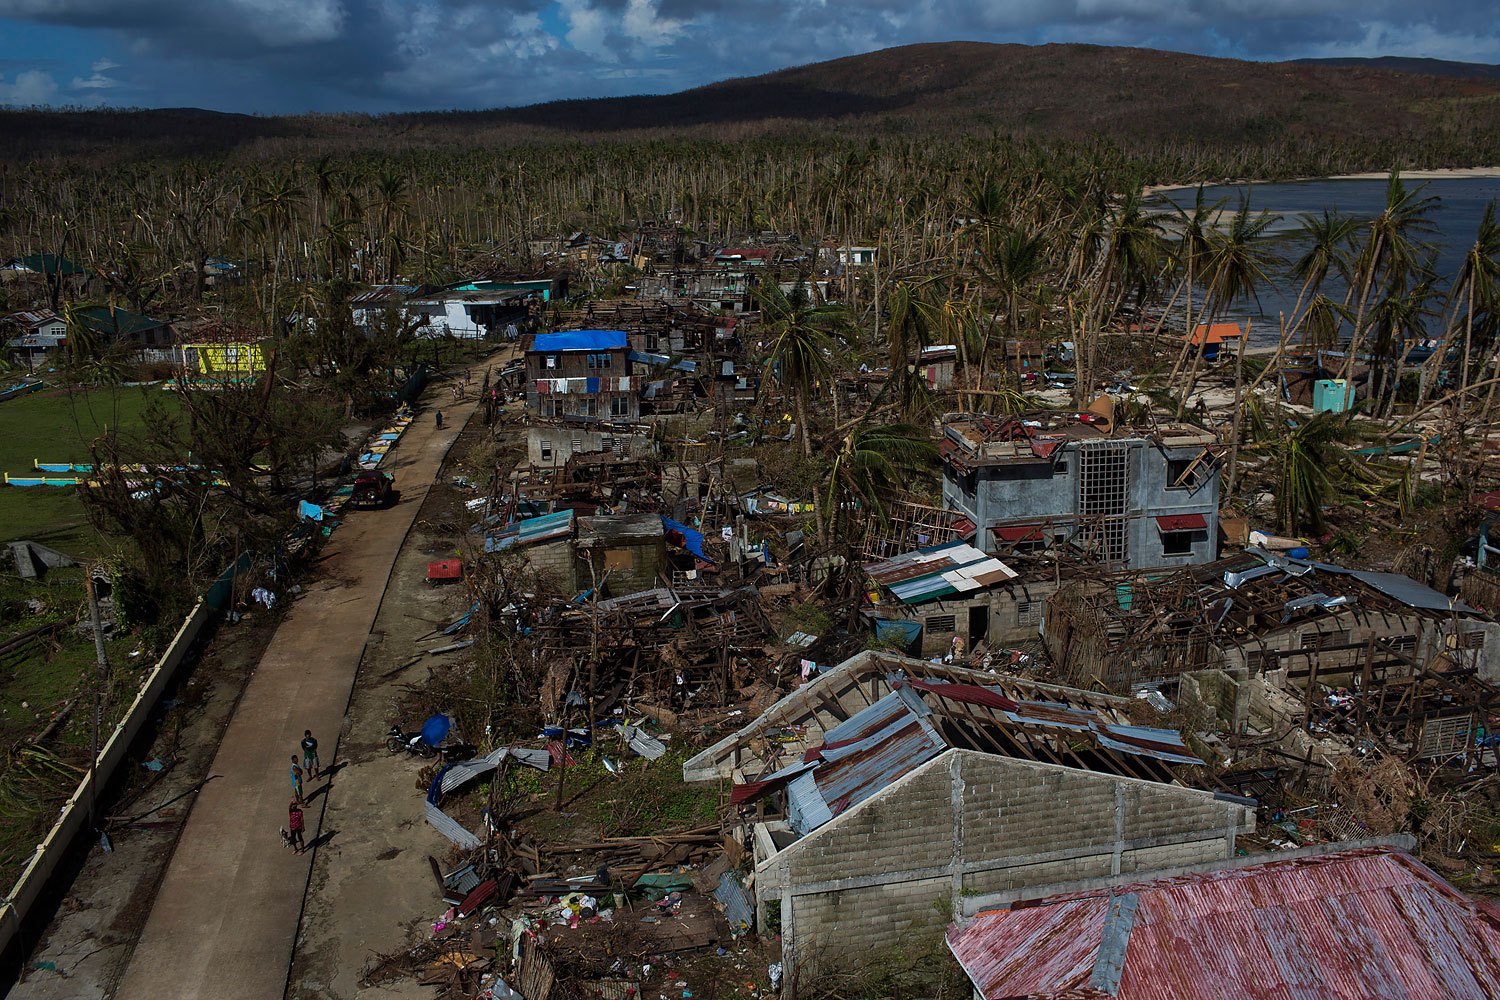 People from a remote island that was cut off by Haiyan Typhoon walk on the street in the street in Homonhon Island, Philippines on November 14, 2013.